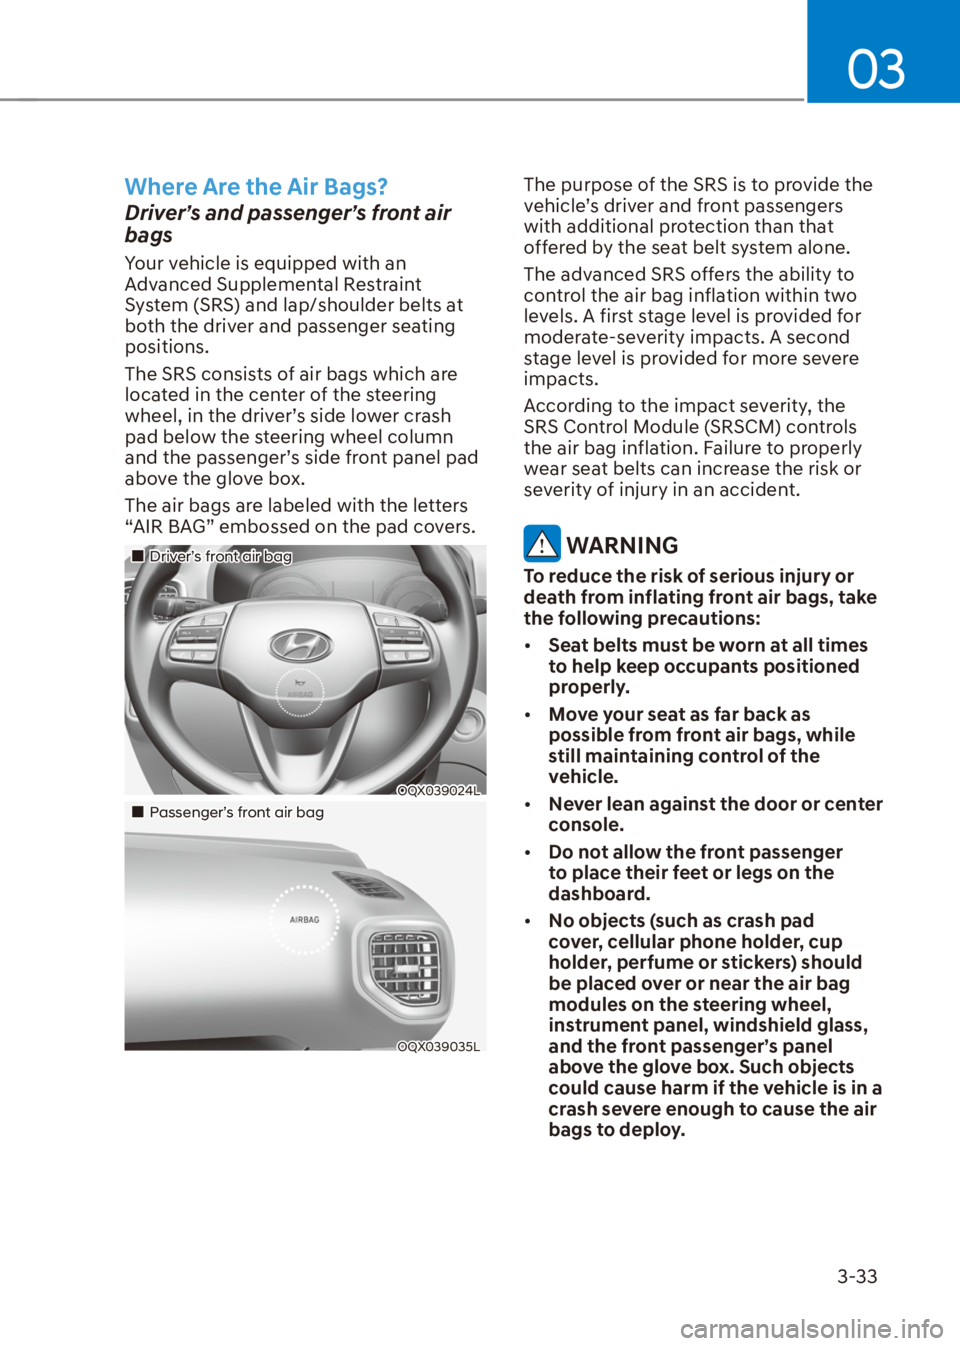 HYUNDAI VENUE 2022  Owners Manual 03
3-33
Where Are the Air Bags?
Driver’s and passenger’s front air 
bags
Your vehicle is equipped with an 
Advanced Supplemental Restraint 
System (SRS) and lap/shoulder belts at 
both the driver 